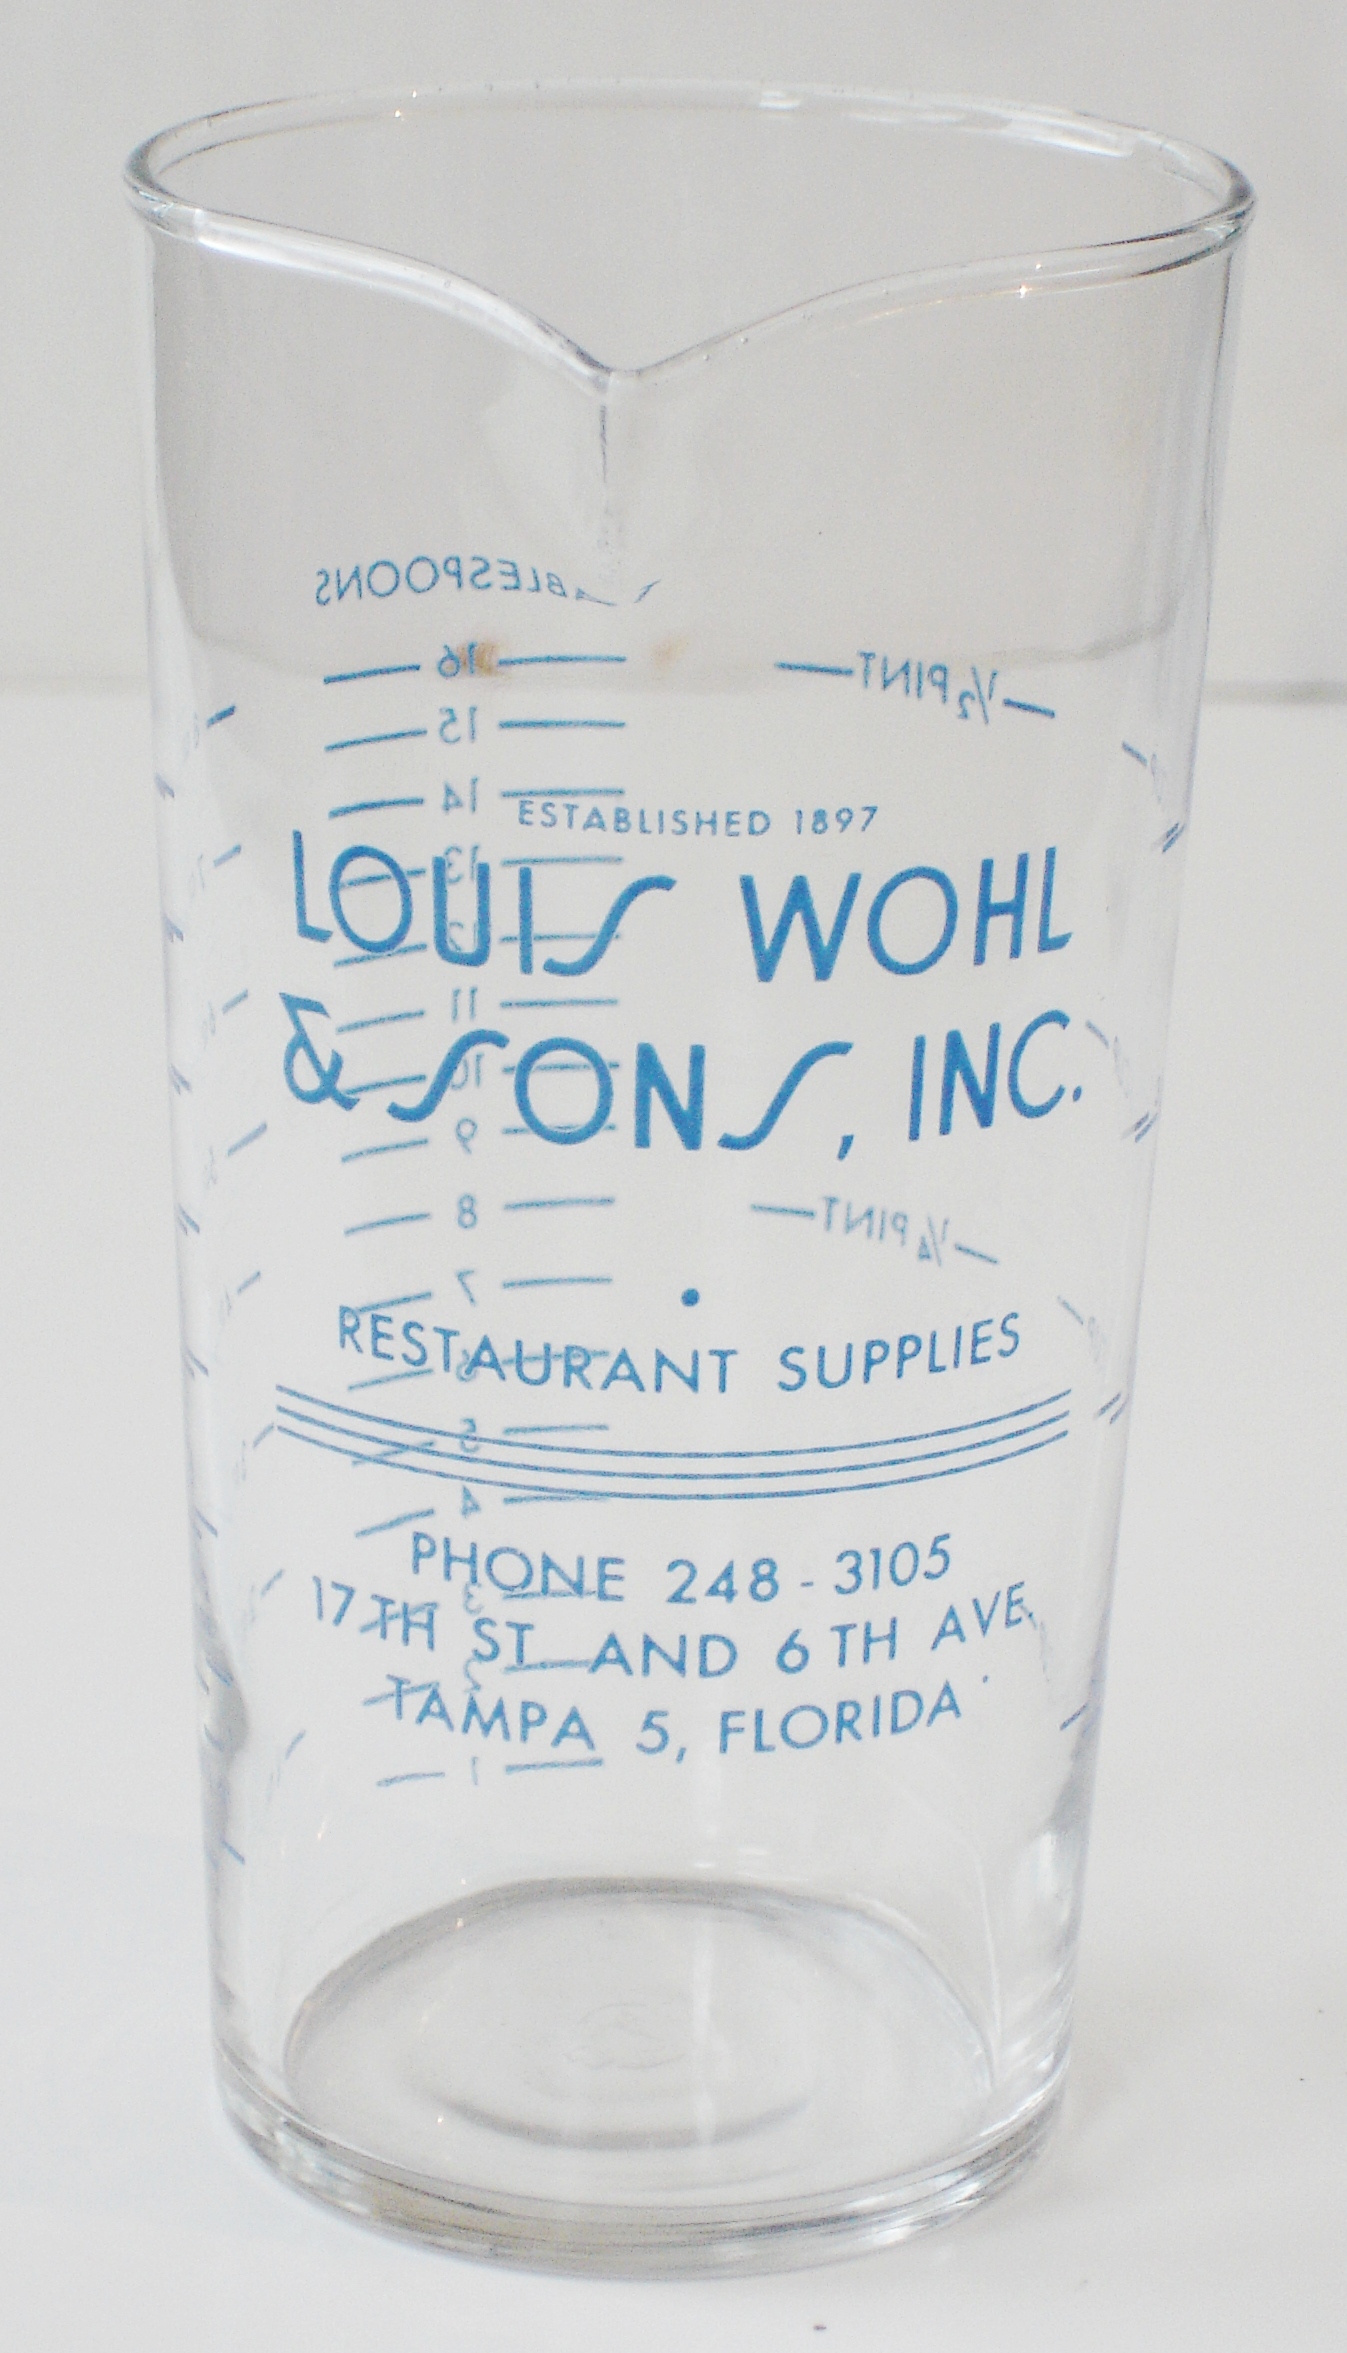 Louis Wohl & Sons, Inc.